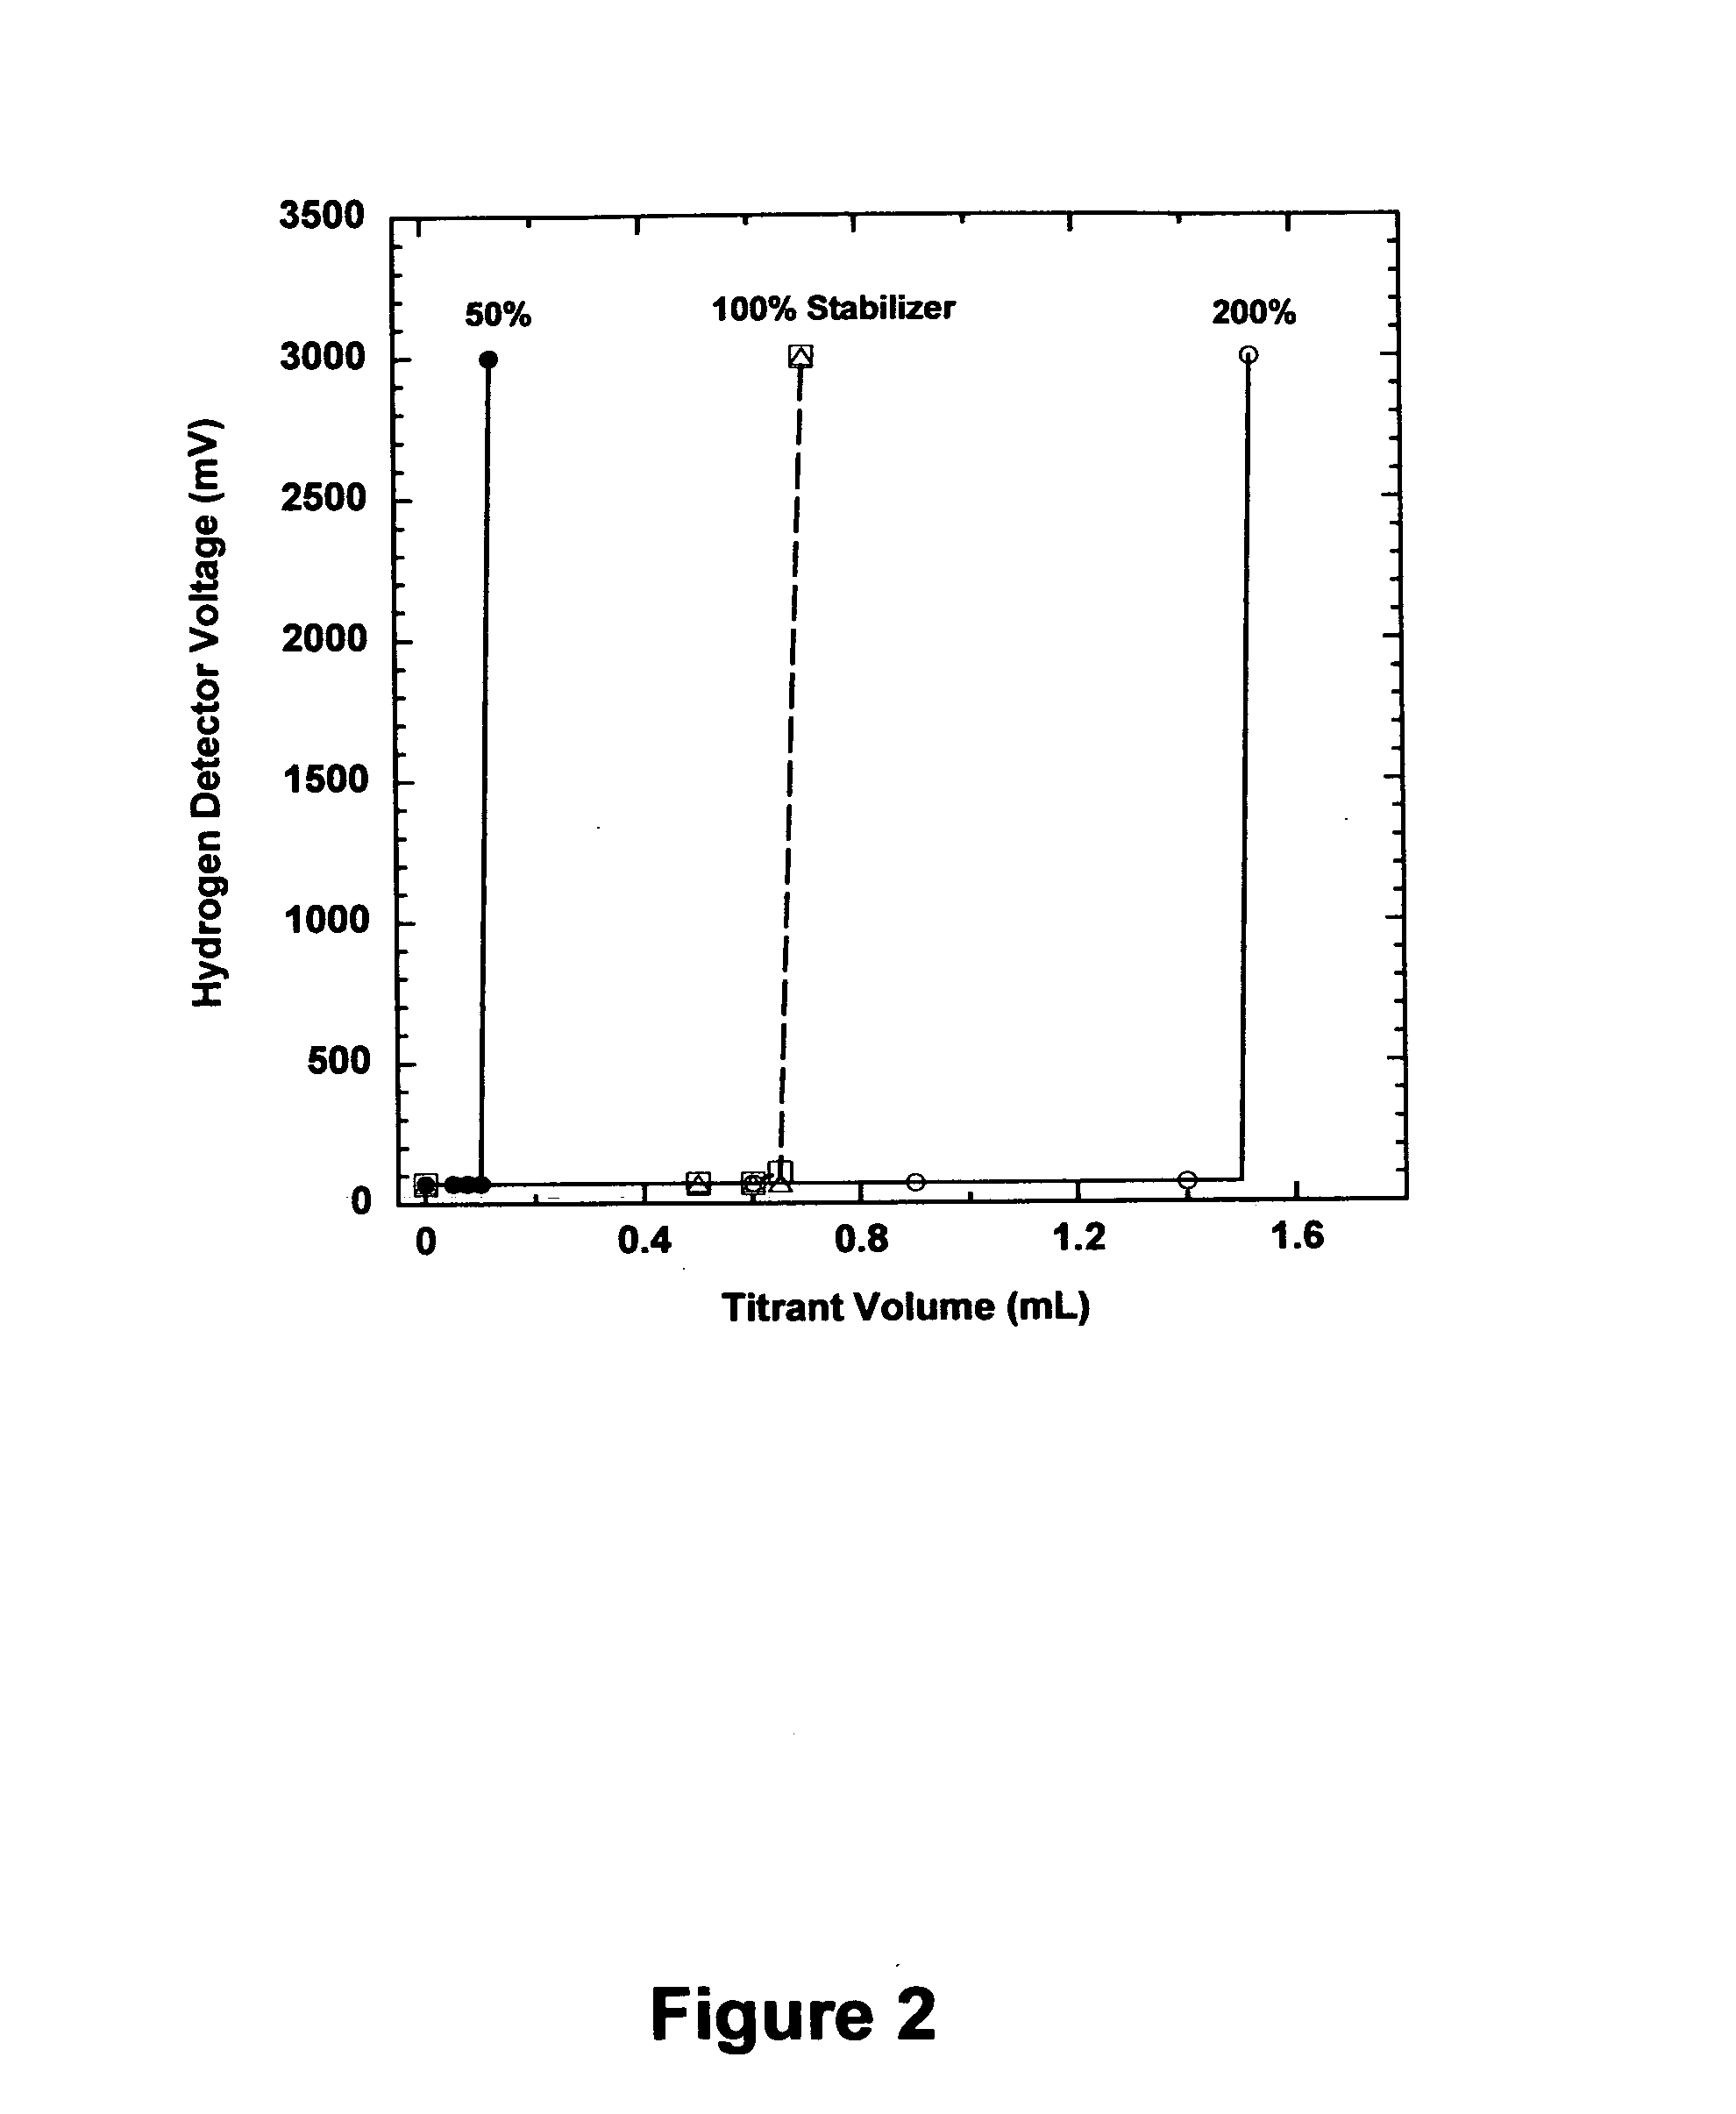 Method and apparatus for determining the stability of an electroless plating bath